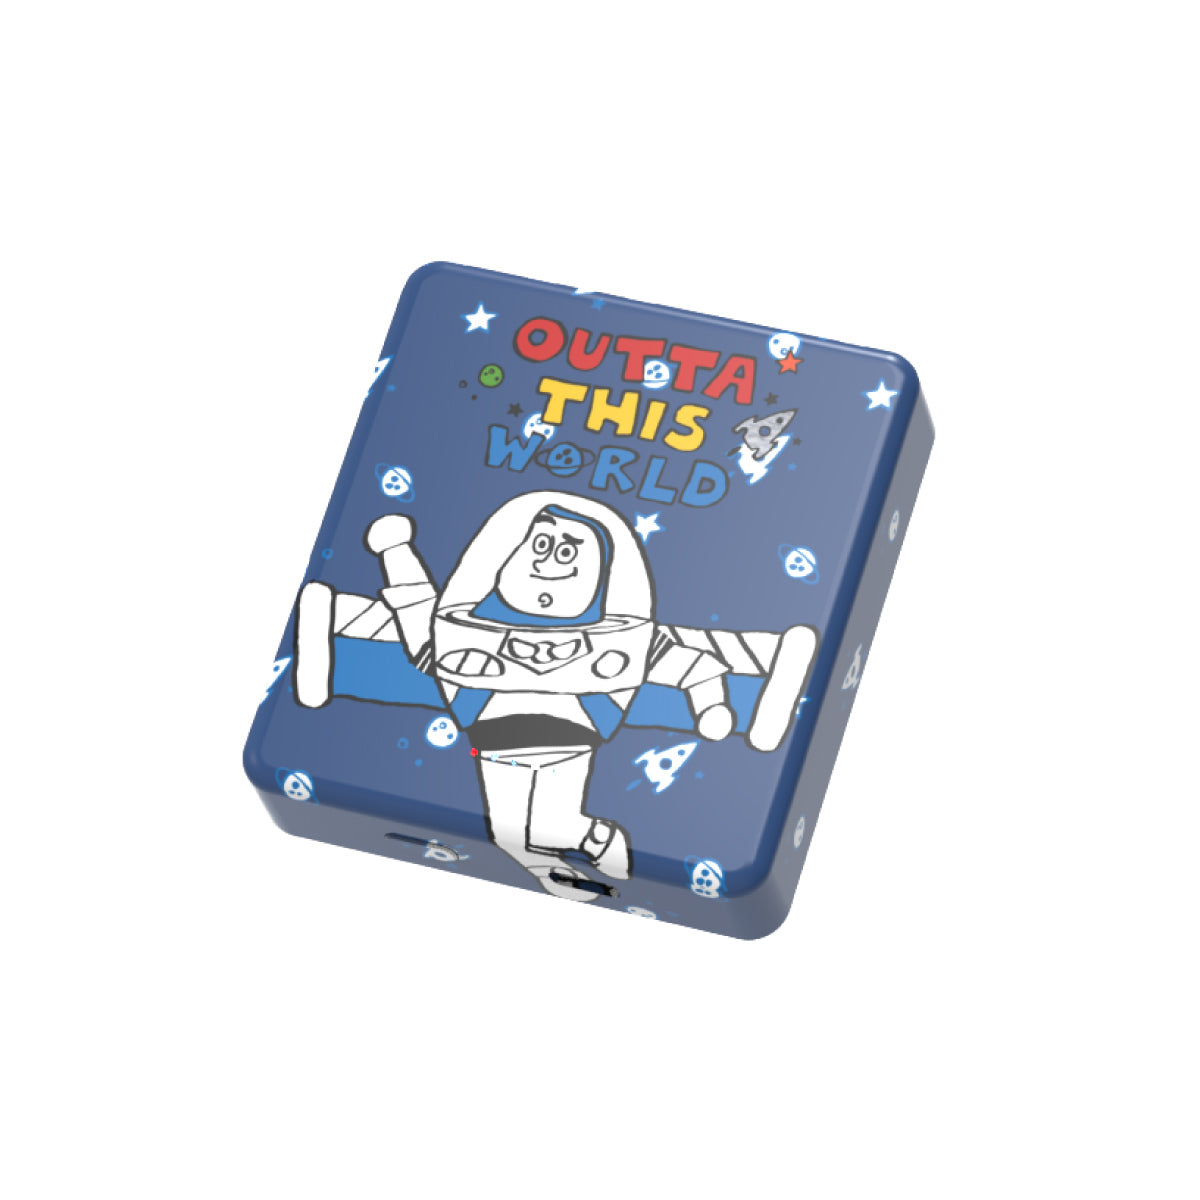 【LIMITED EDITION】Toy Story Magnetic Wireless Powerbank - Buzz